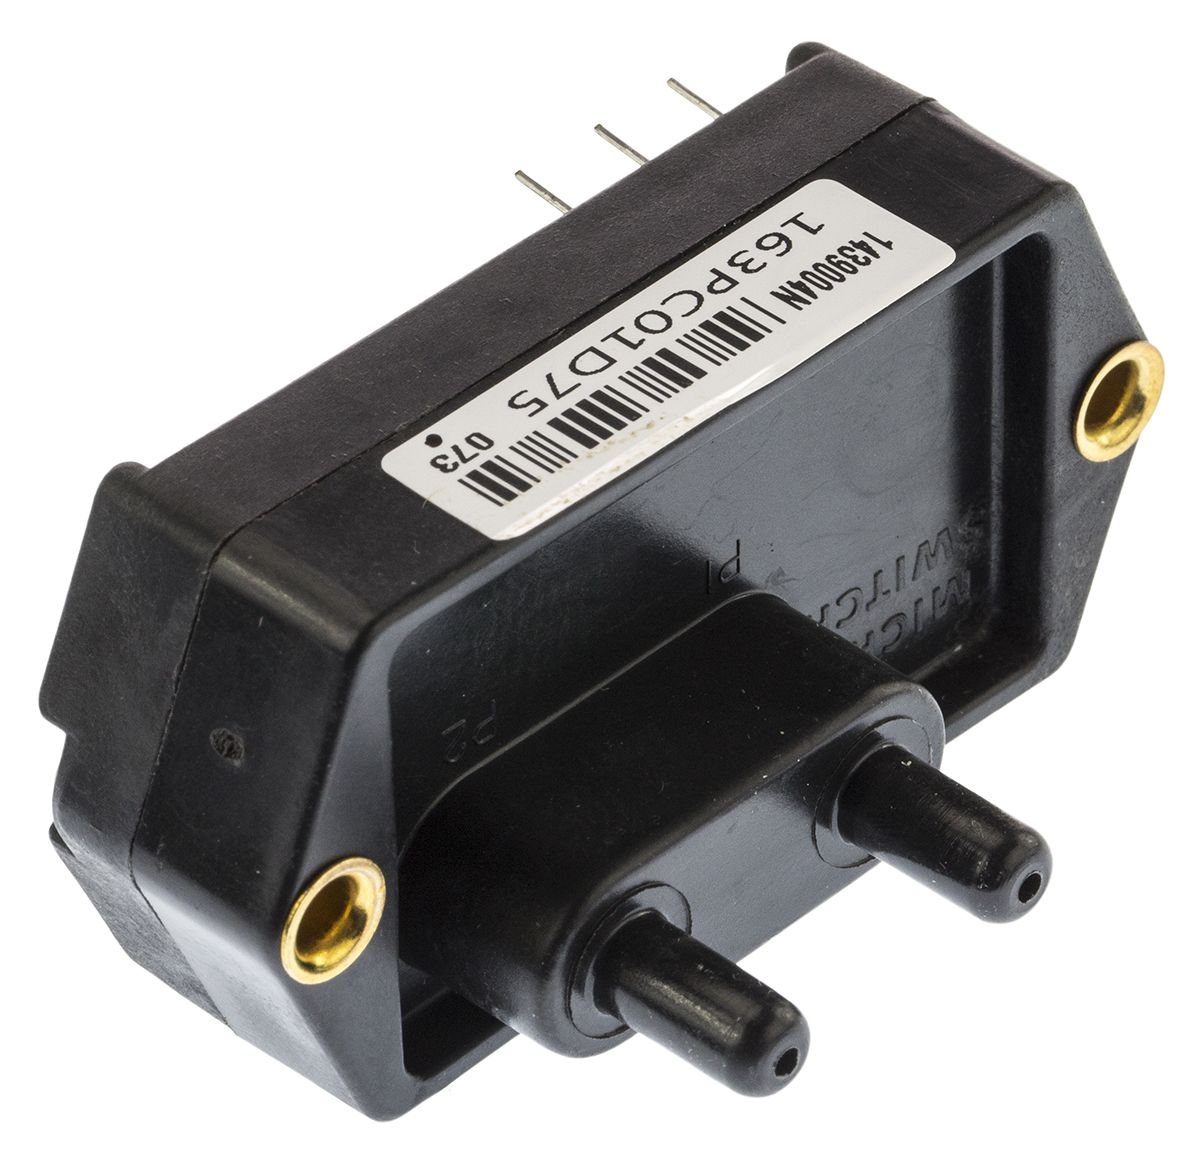 Honeywell 160PC Series Pressure Sensor, -2.5in wg Min, 2.5in wg Max, Amplified Output, Differential Reading